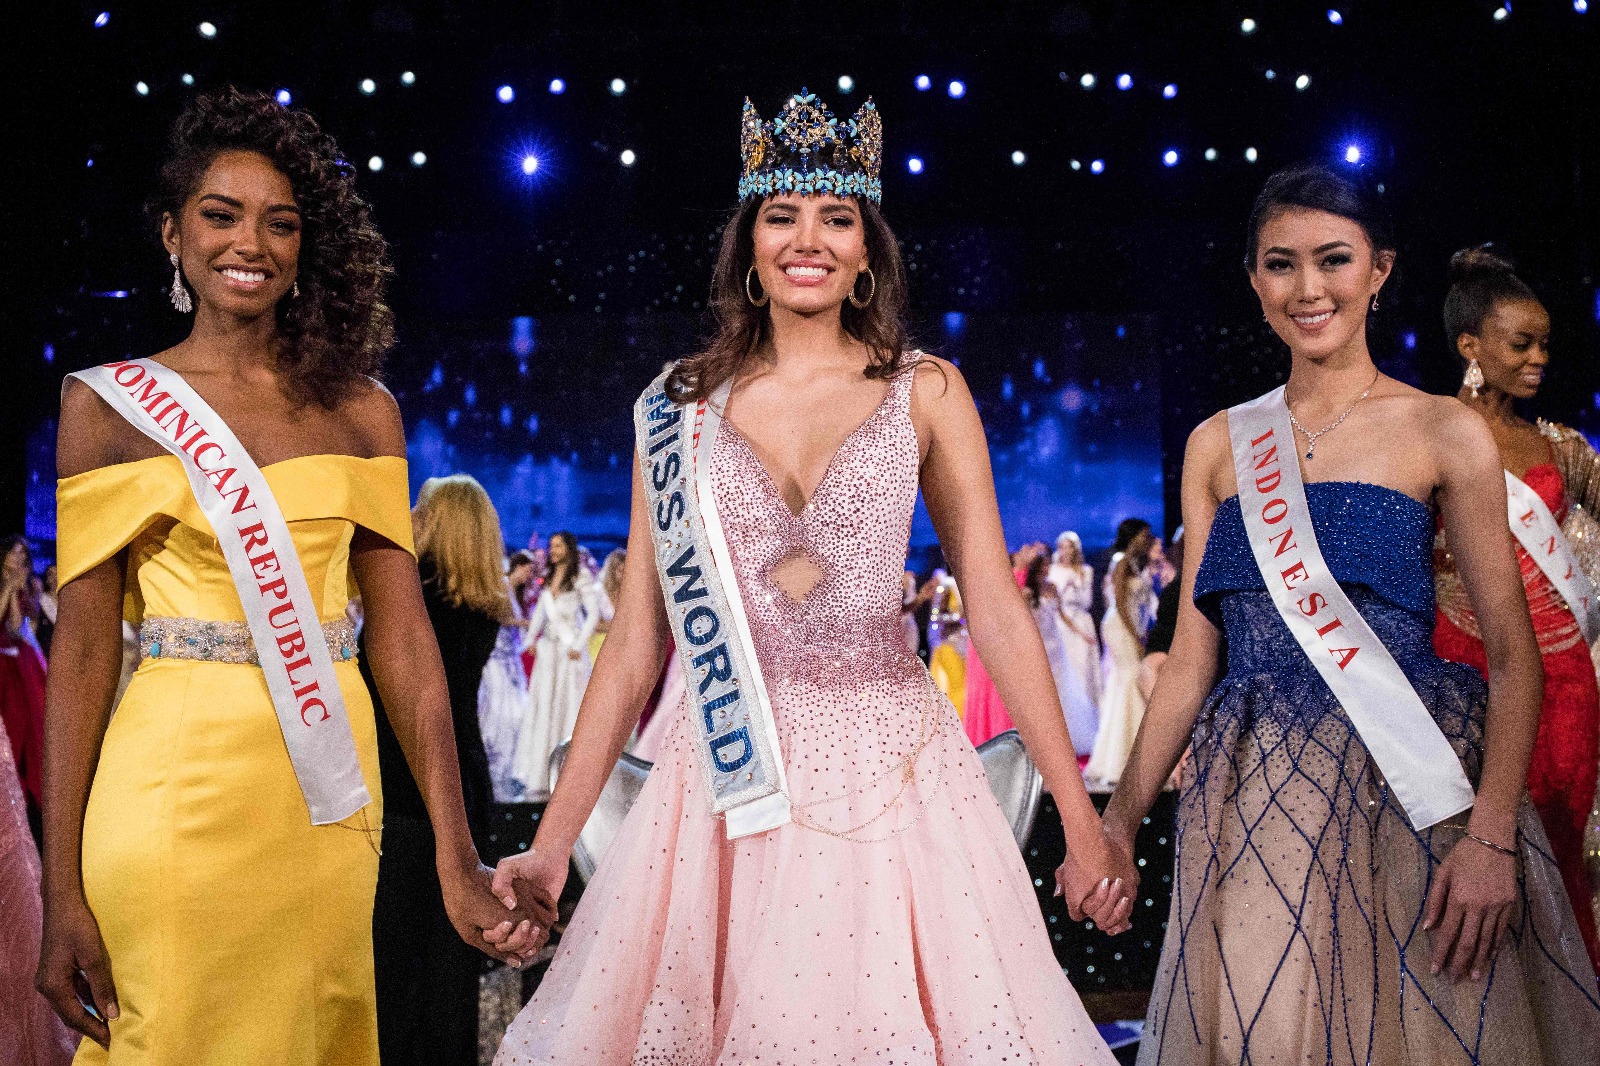 First runner up Miss Dominican Republic Yaritza Miguelina Reyes Ramirez (L); Miss World 2016 Stephanie Del Valle of Puerto Rico (C); and second runner up Miss Indonesia Natasha Mannuela (R)/AFP